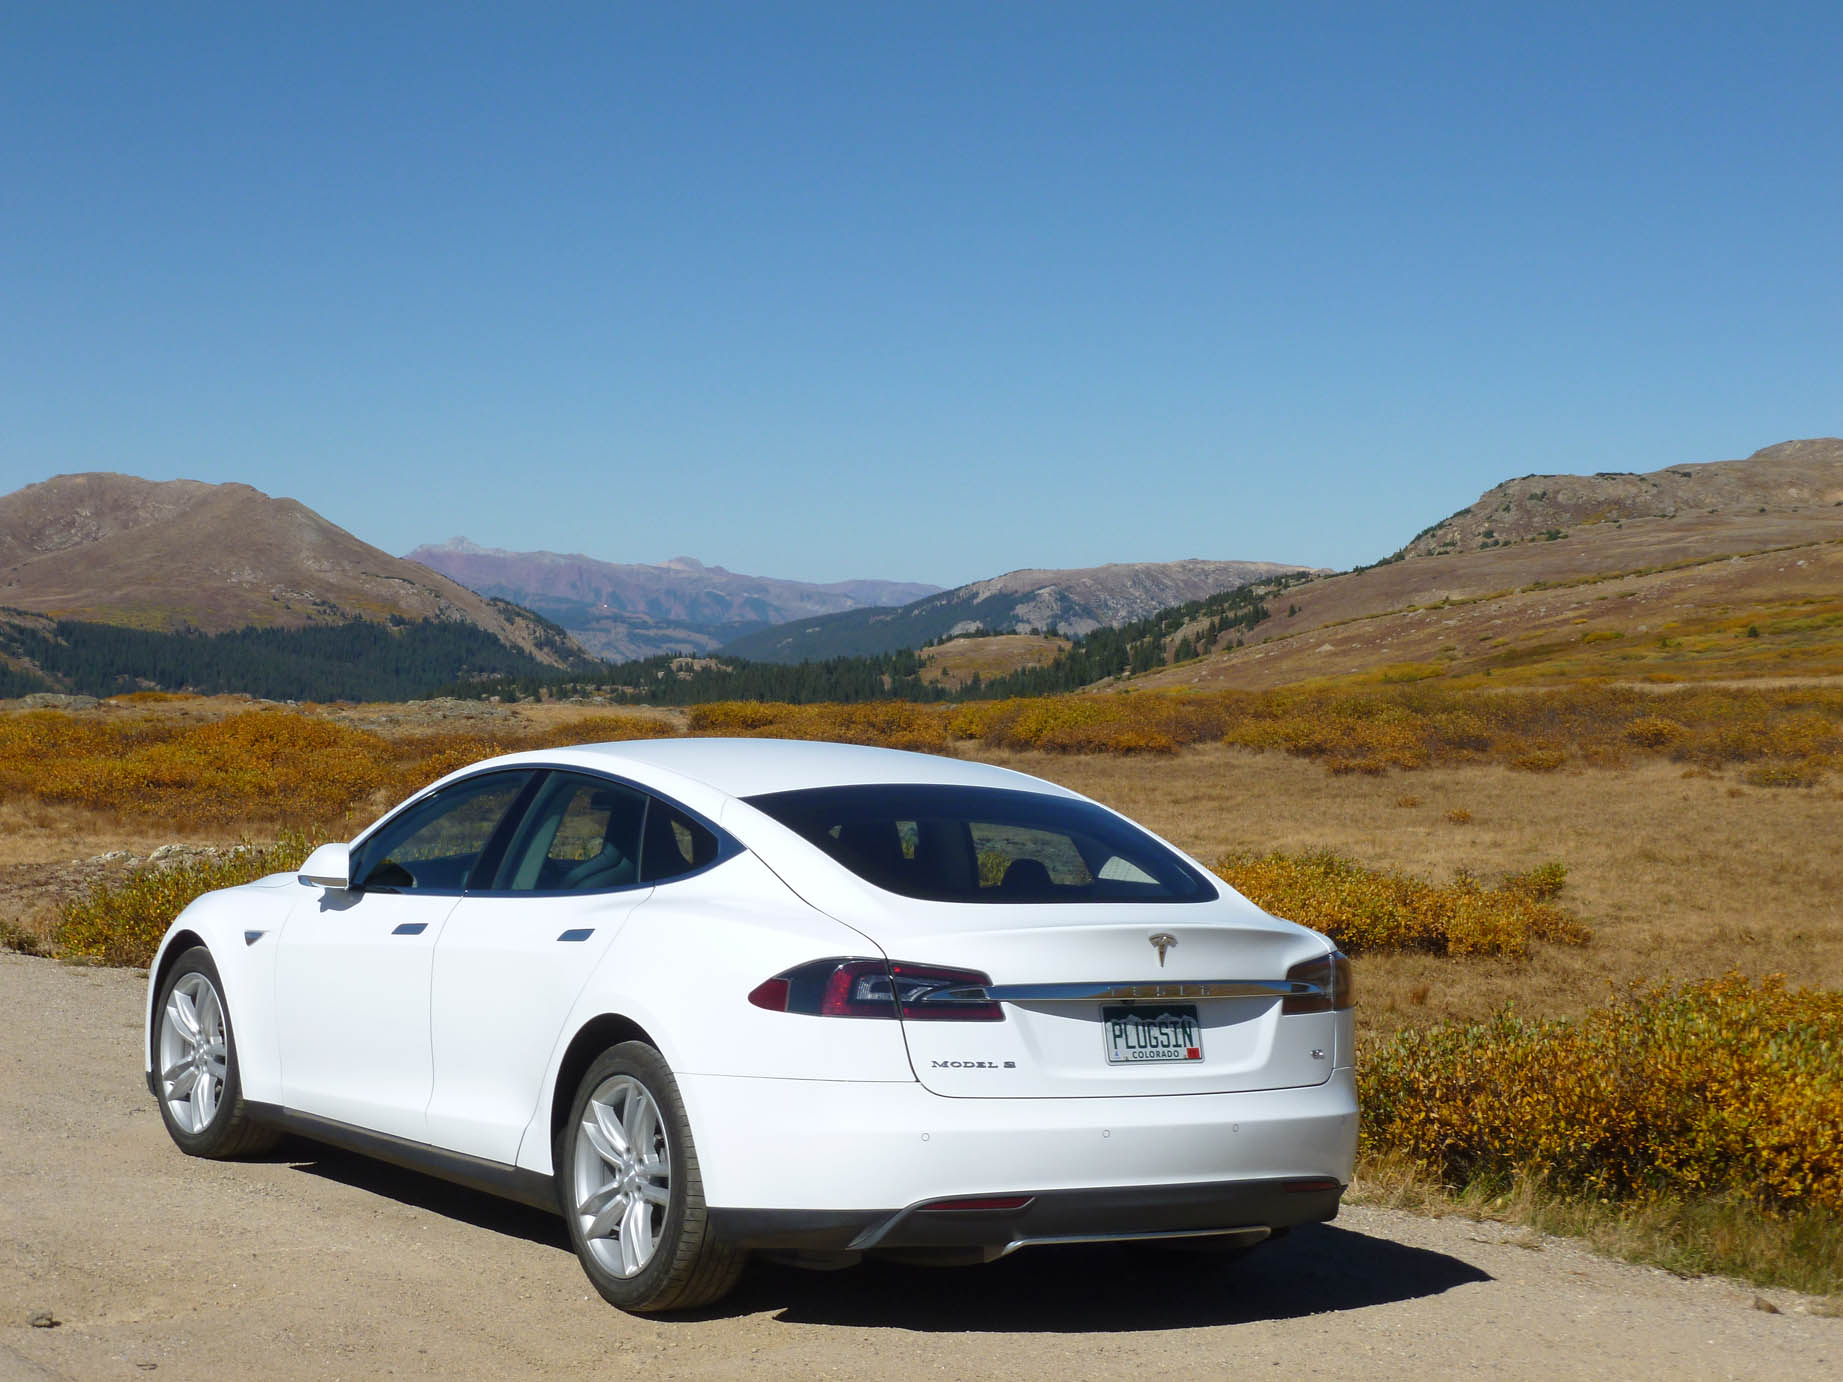 Model S at Indpendence Pass2121sf 9-14-18.JPG